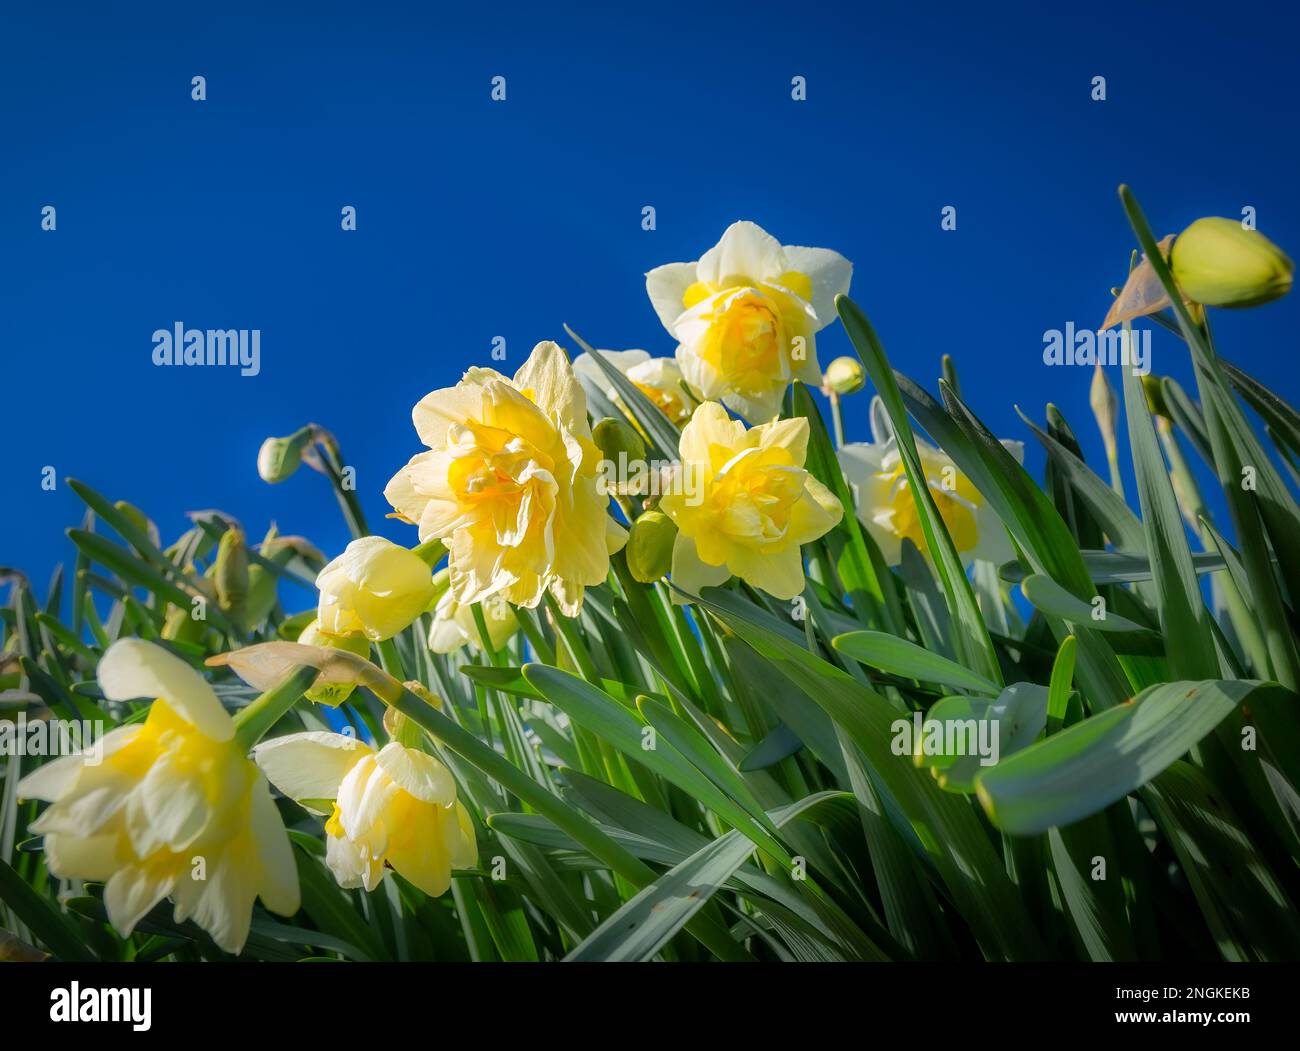 Spring yellow daffodils under a bright blue sky Stock Photo